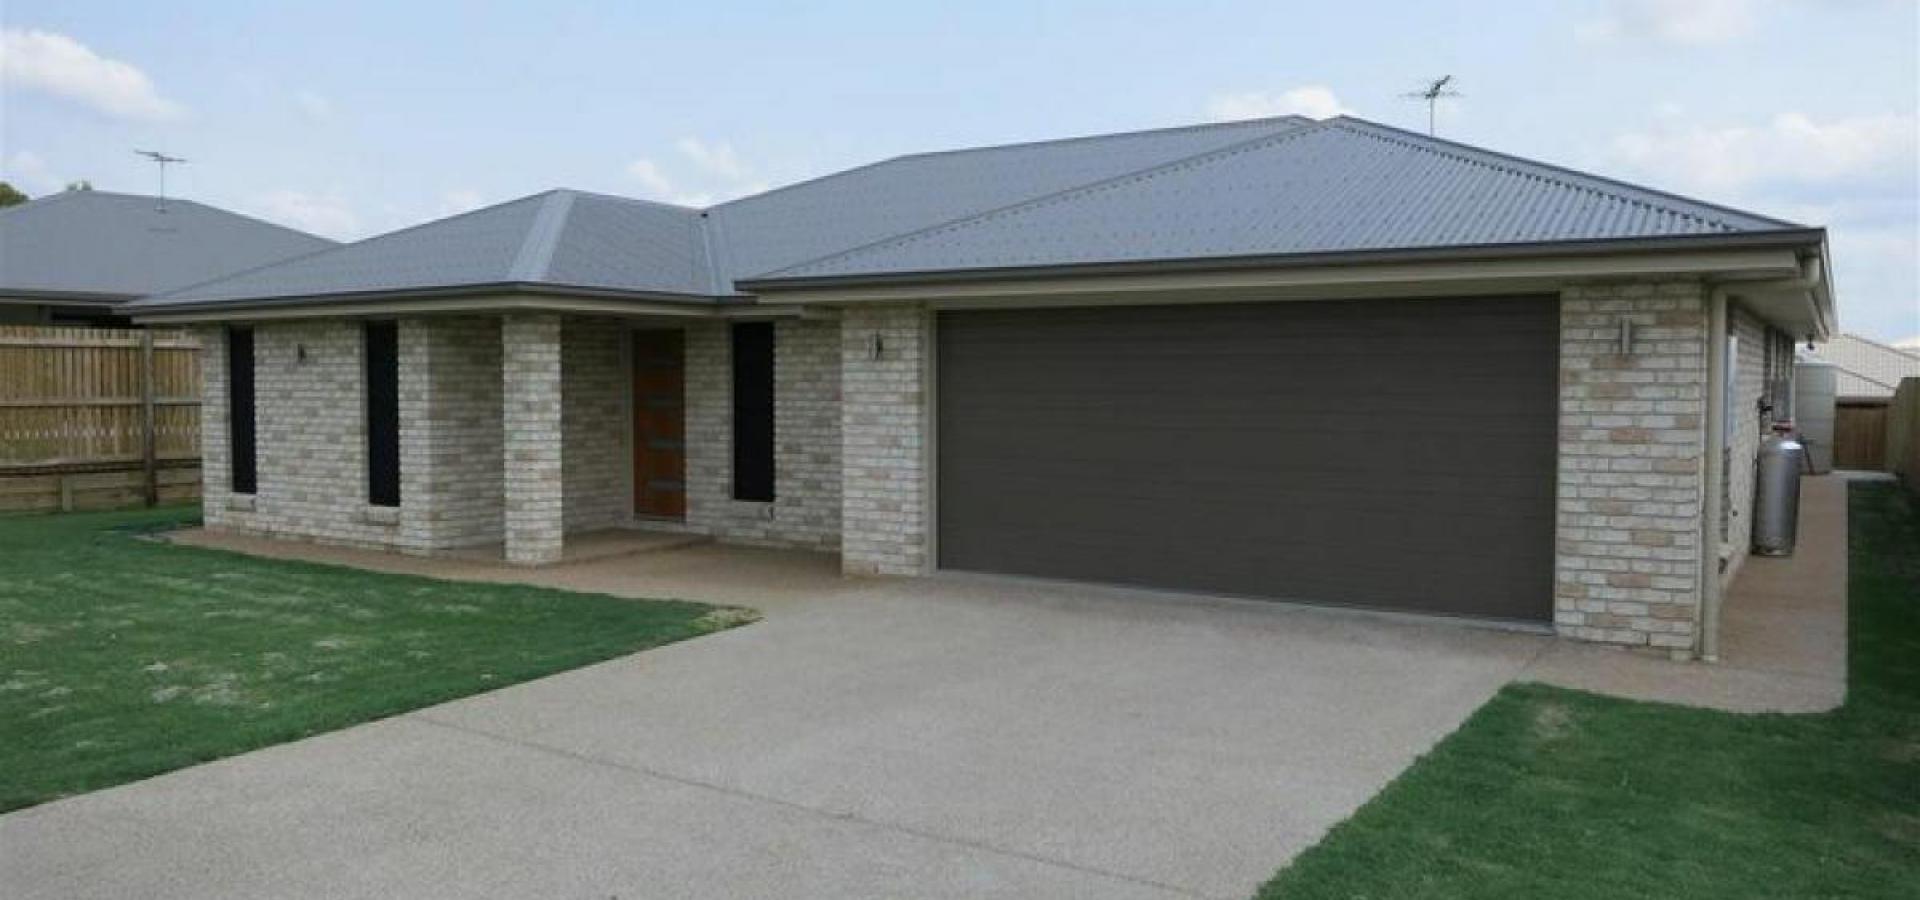 Classy Well Designed  4 Bedroom Home In Quality Elevated All Brick Suburb in Gracemere